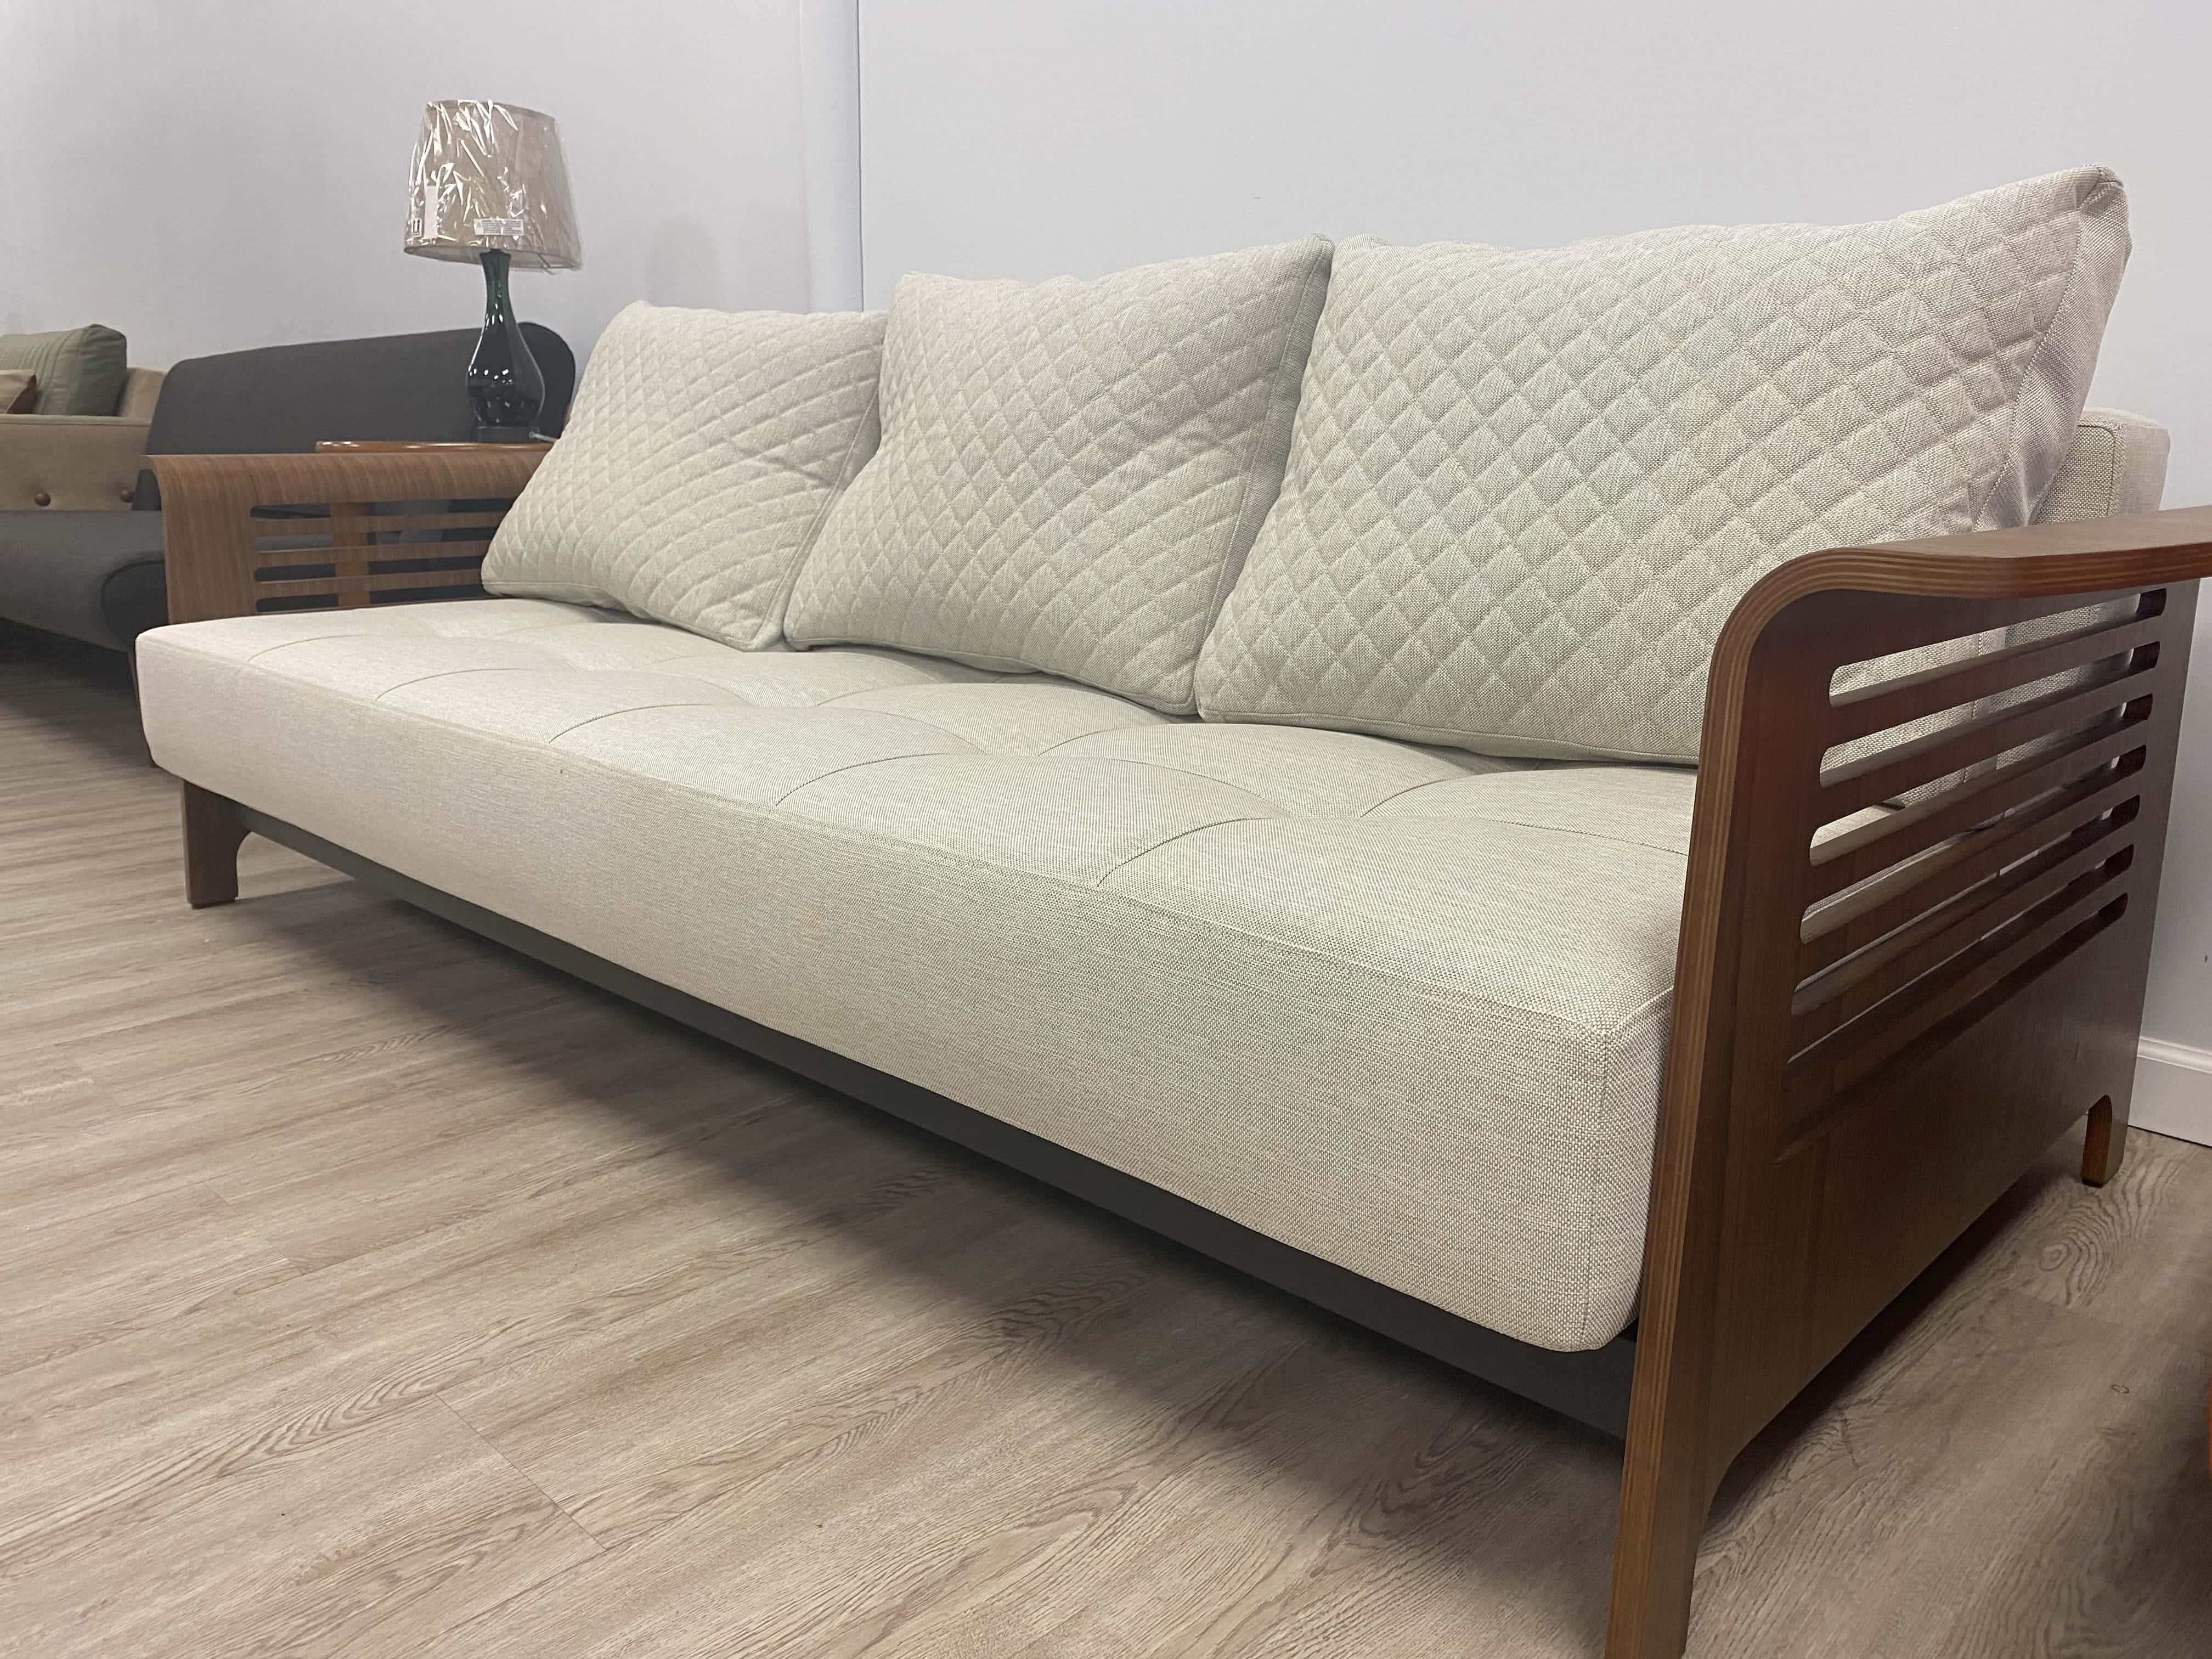 sofa bed full size for sale